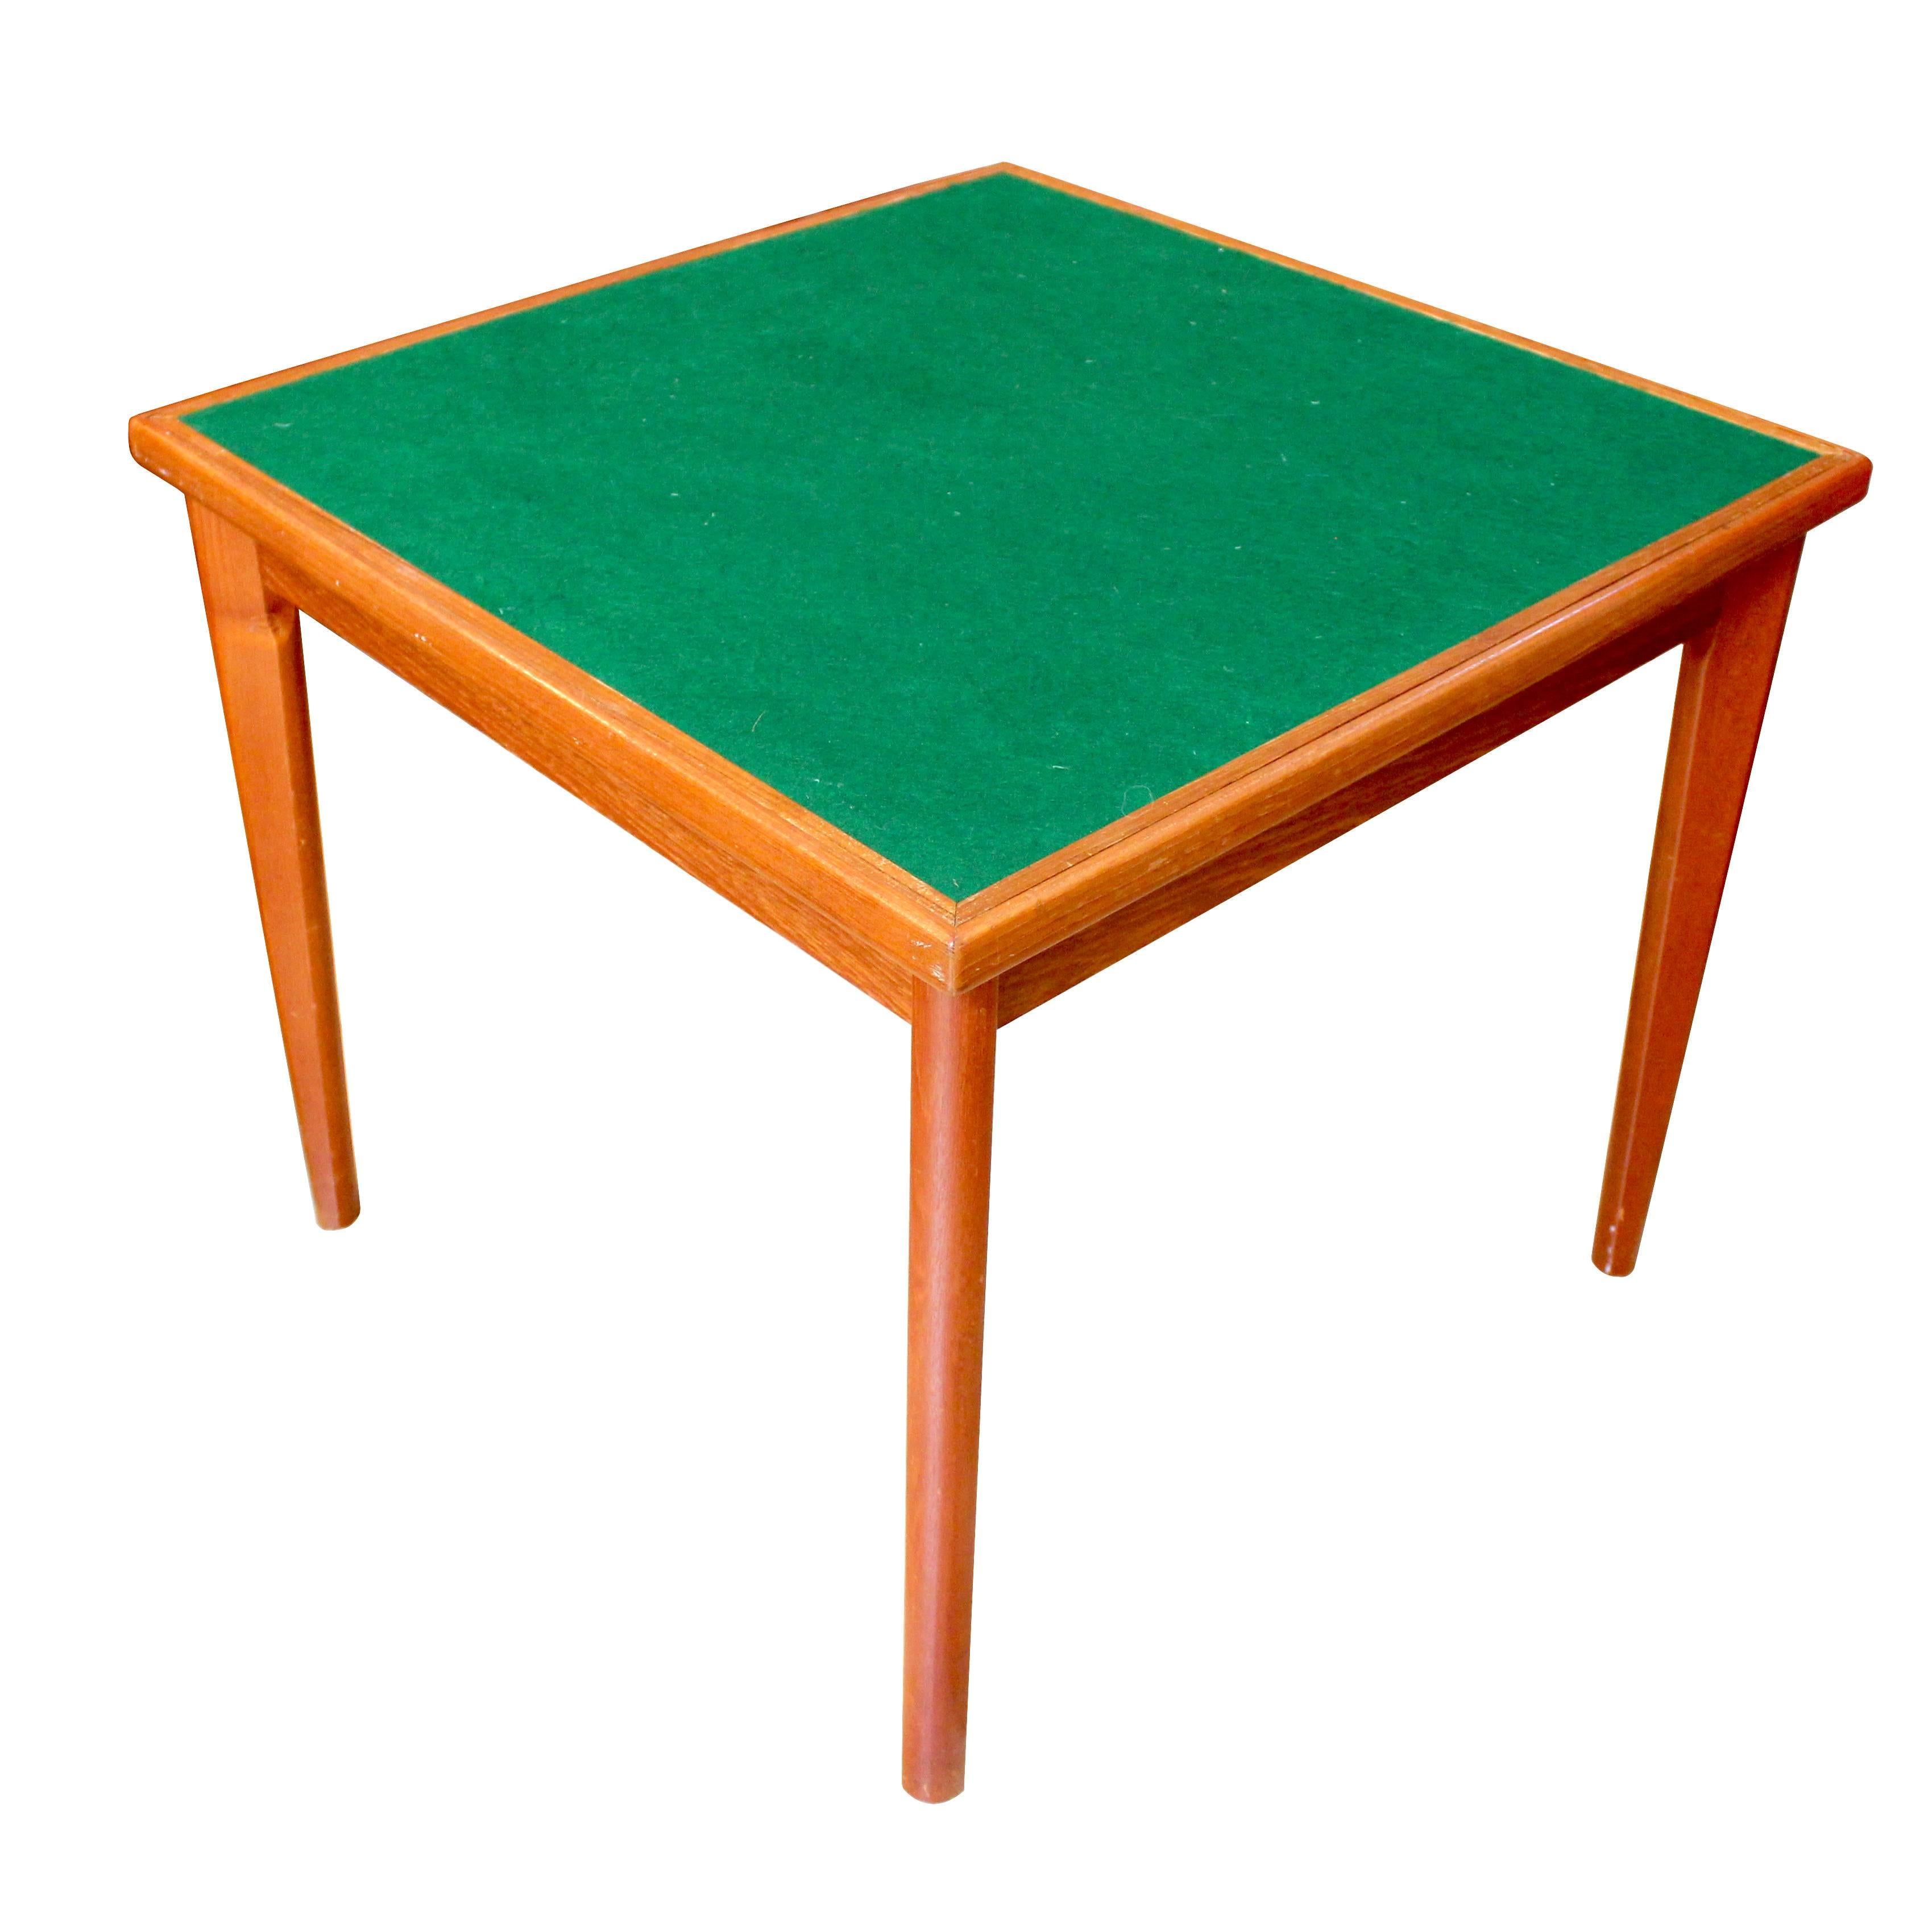 1960s Danish Modern teak game table with reversible top by Brdr. Furbo. The tabletop lifts off, with teak on one side and green felt on the other. A unique piece that functions equally well as a small dining table and a game or card table.